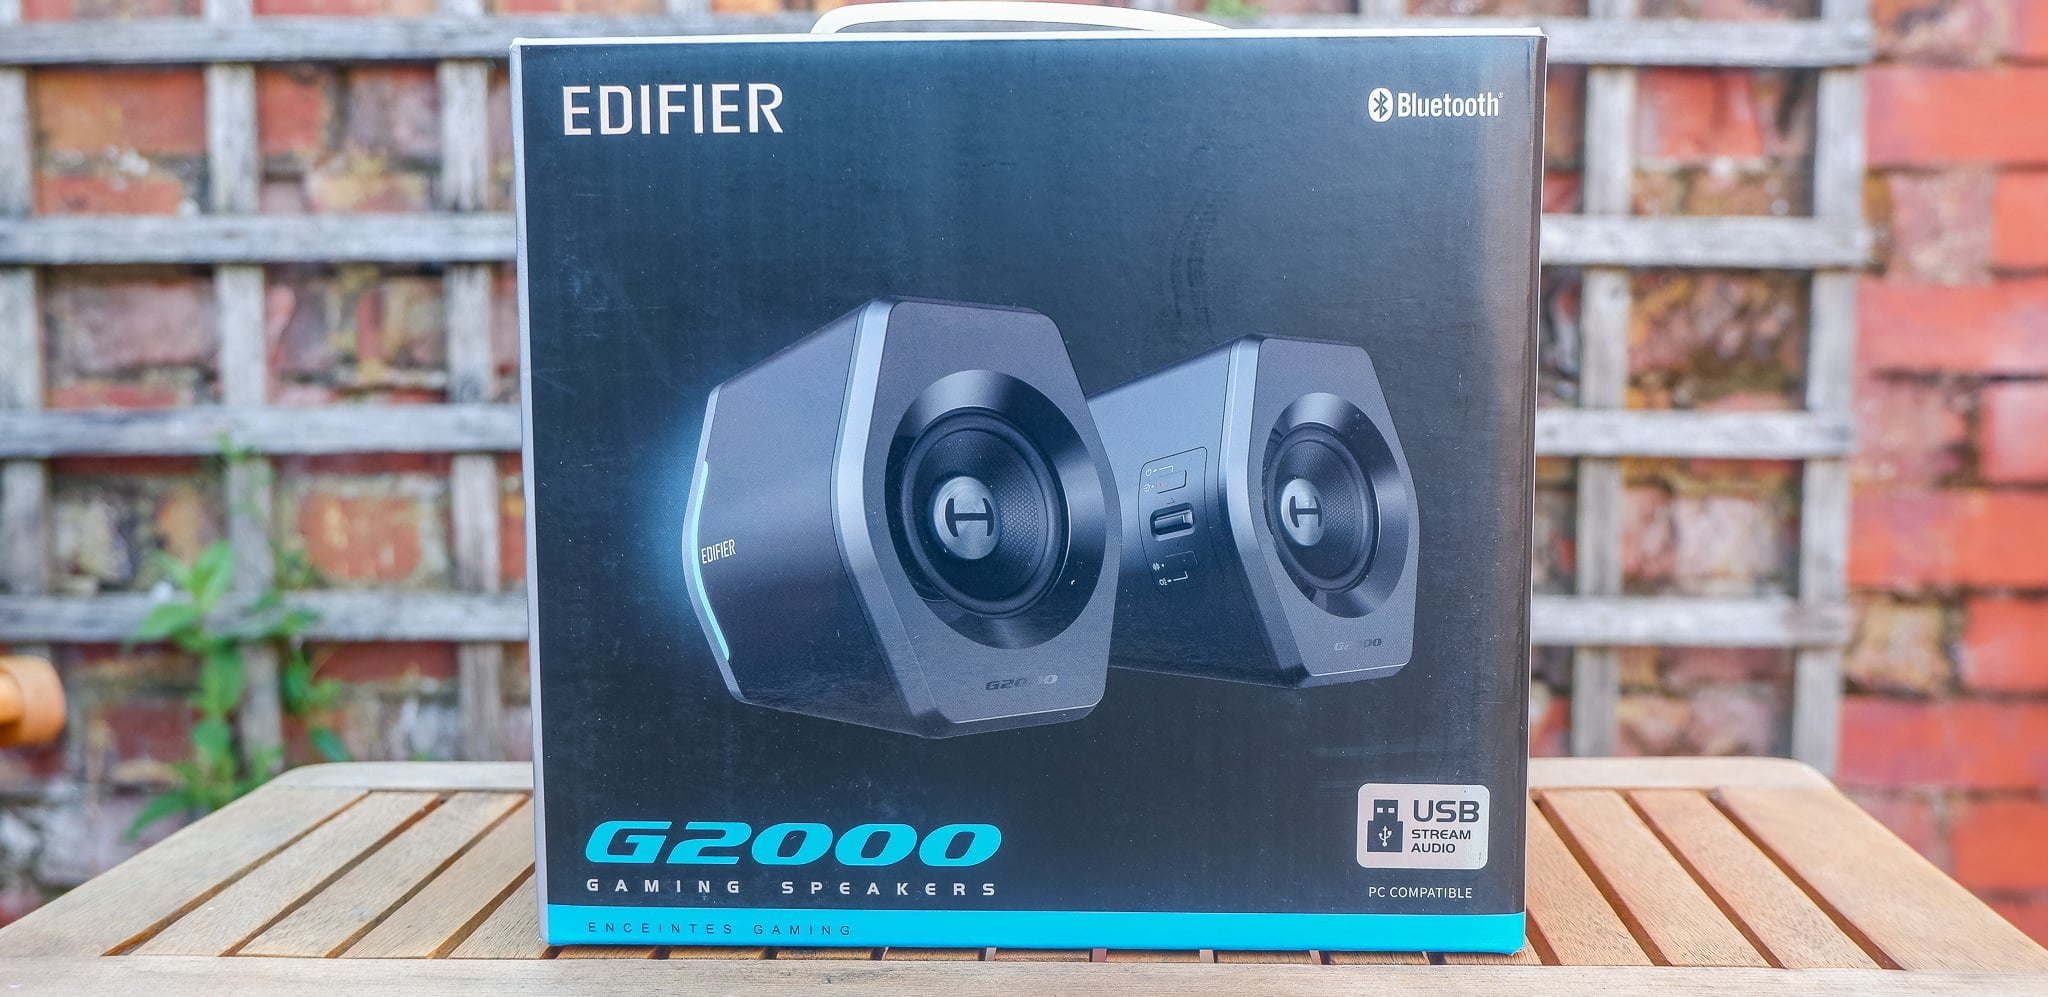 Edifier G2000 Computer Speakers review 4